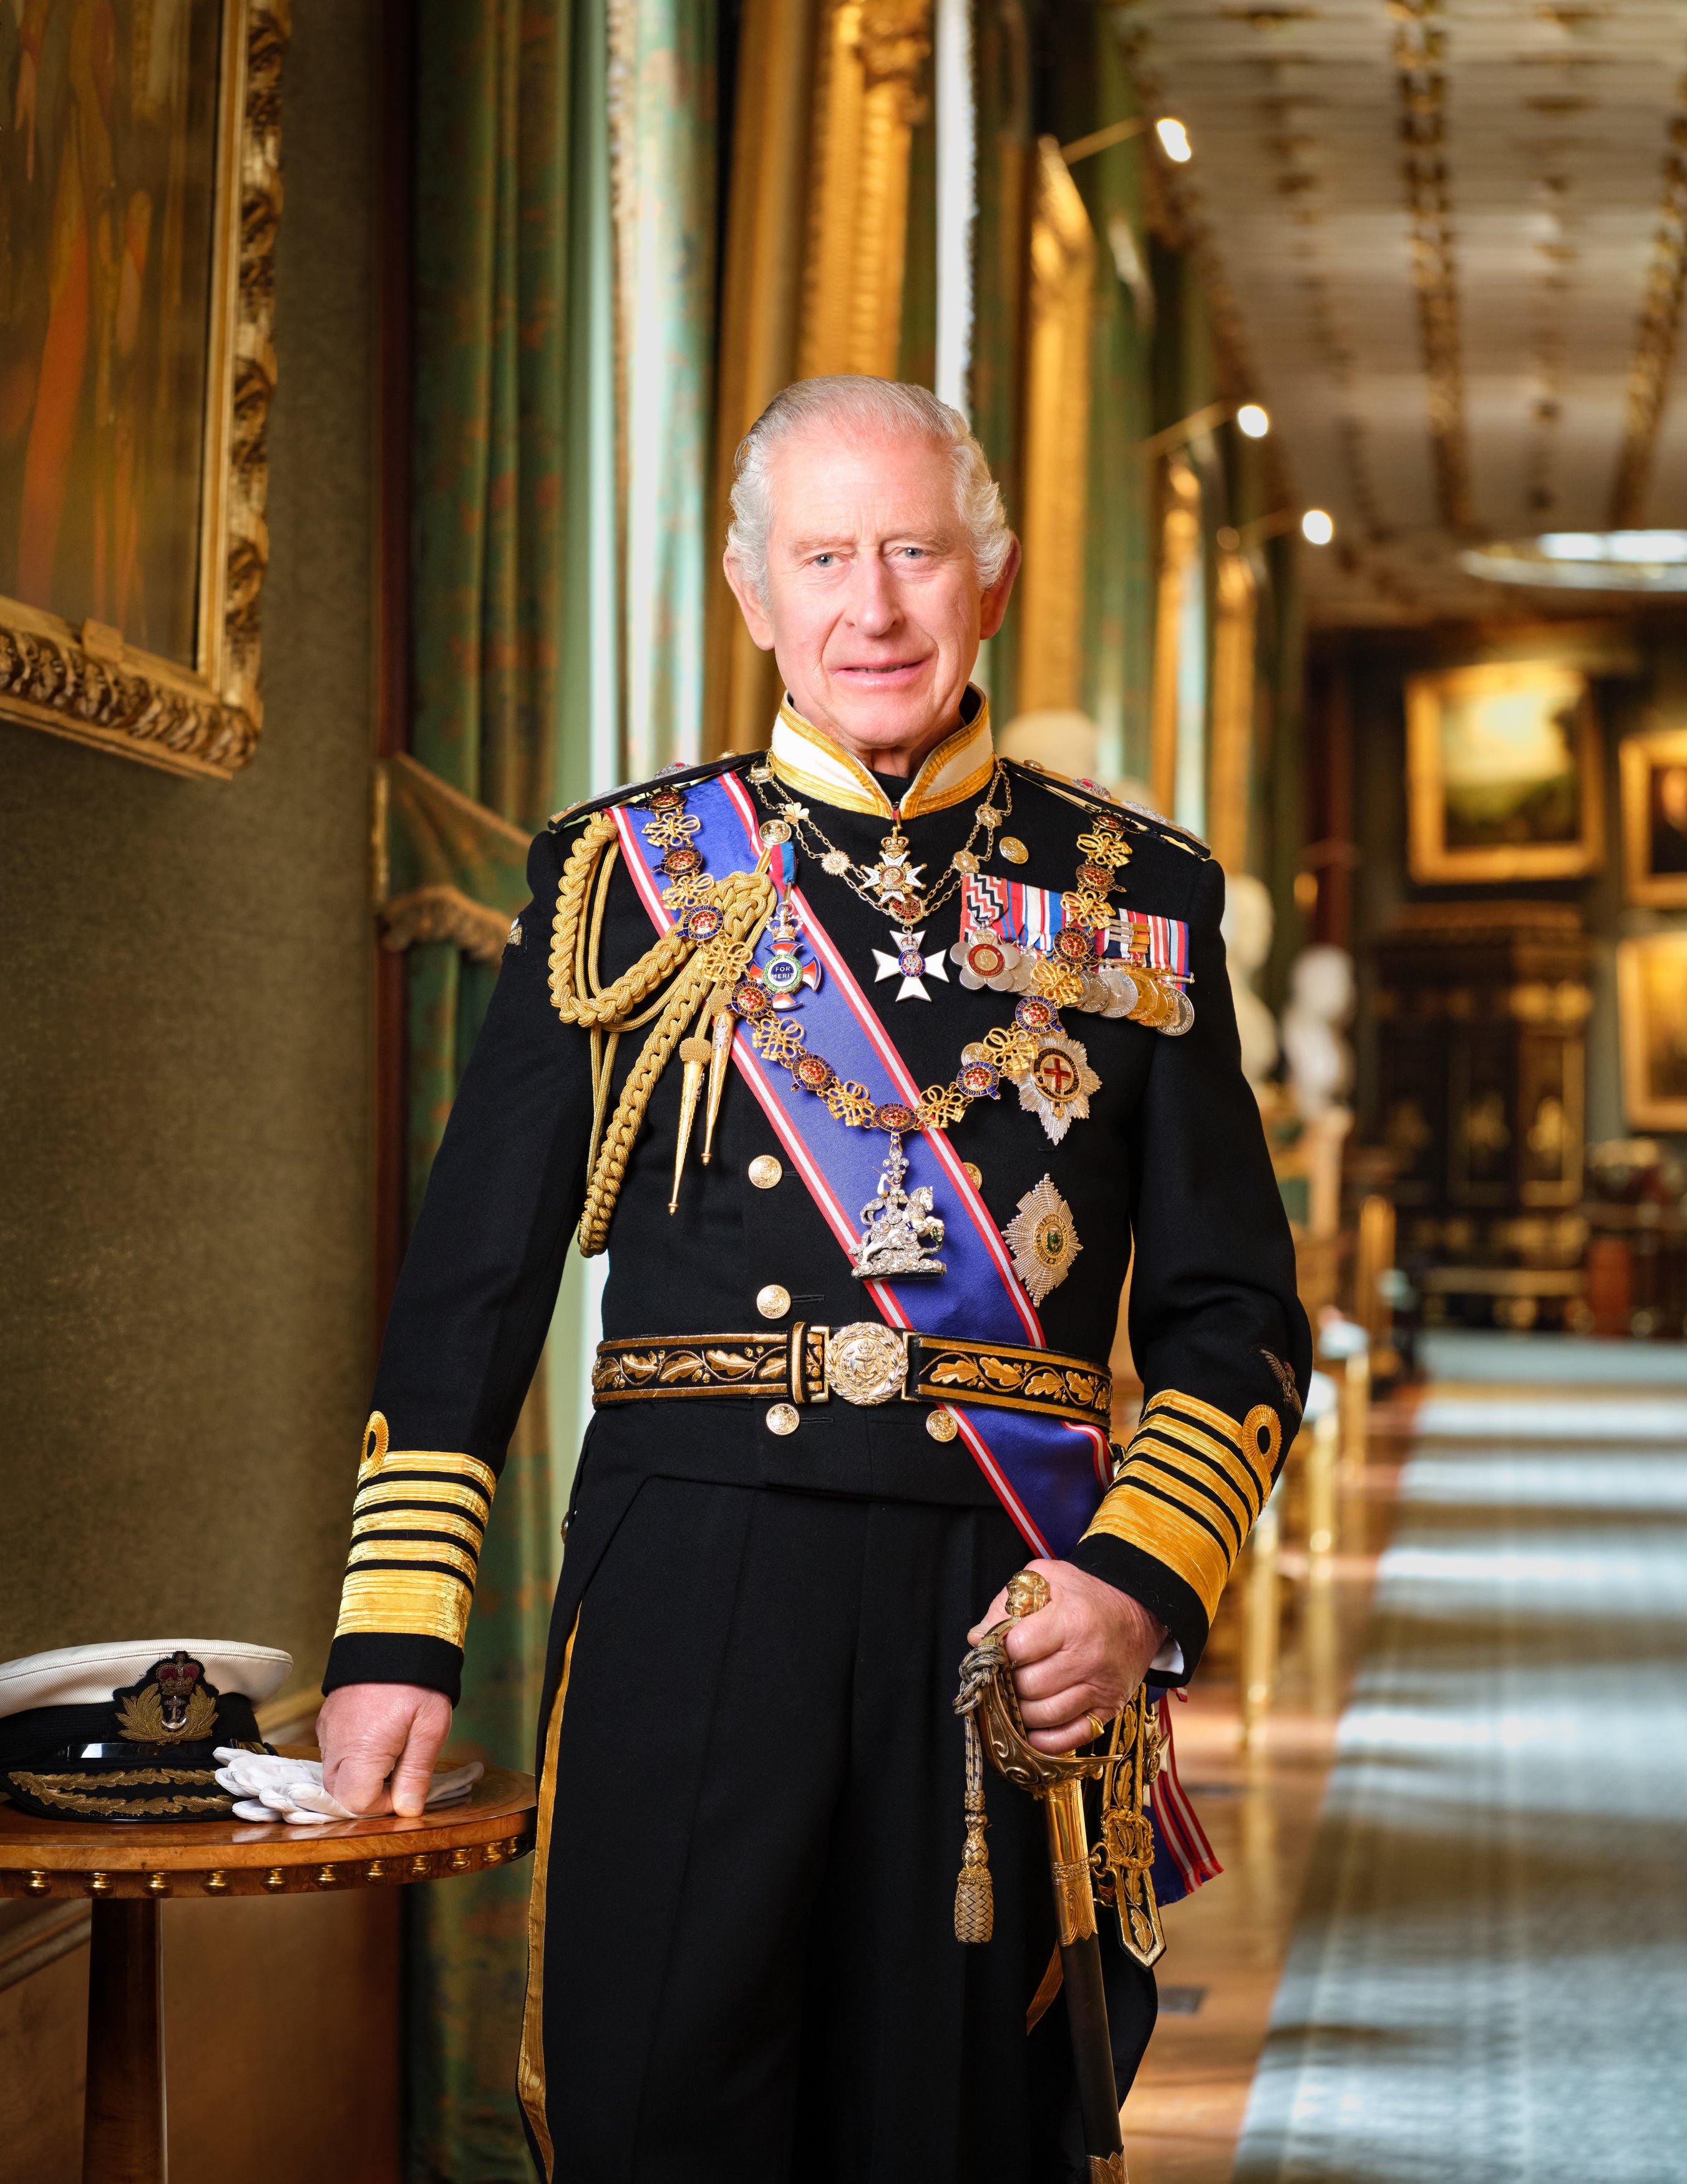 Burnand believes a new portrait of the king could be released around his official birthday in June